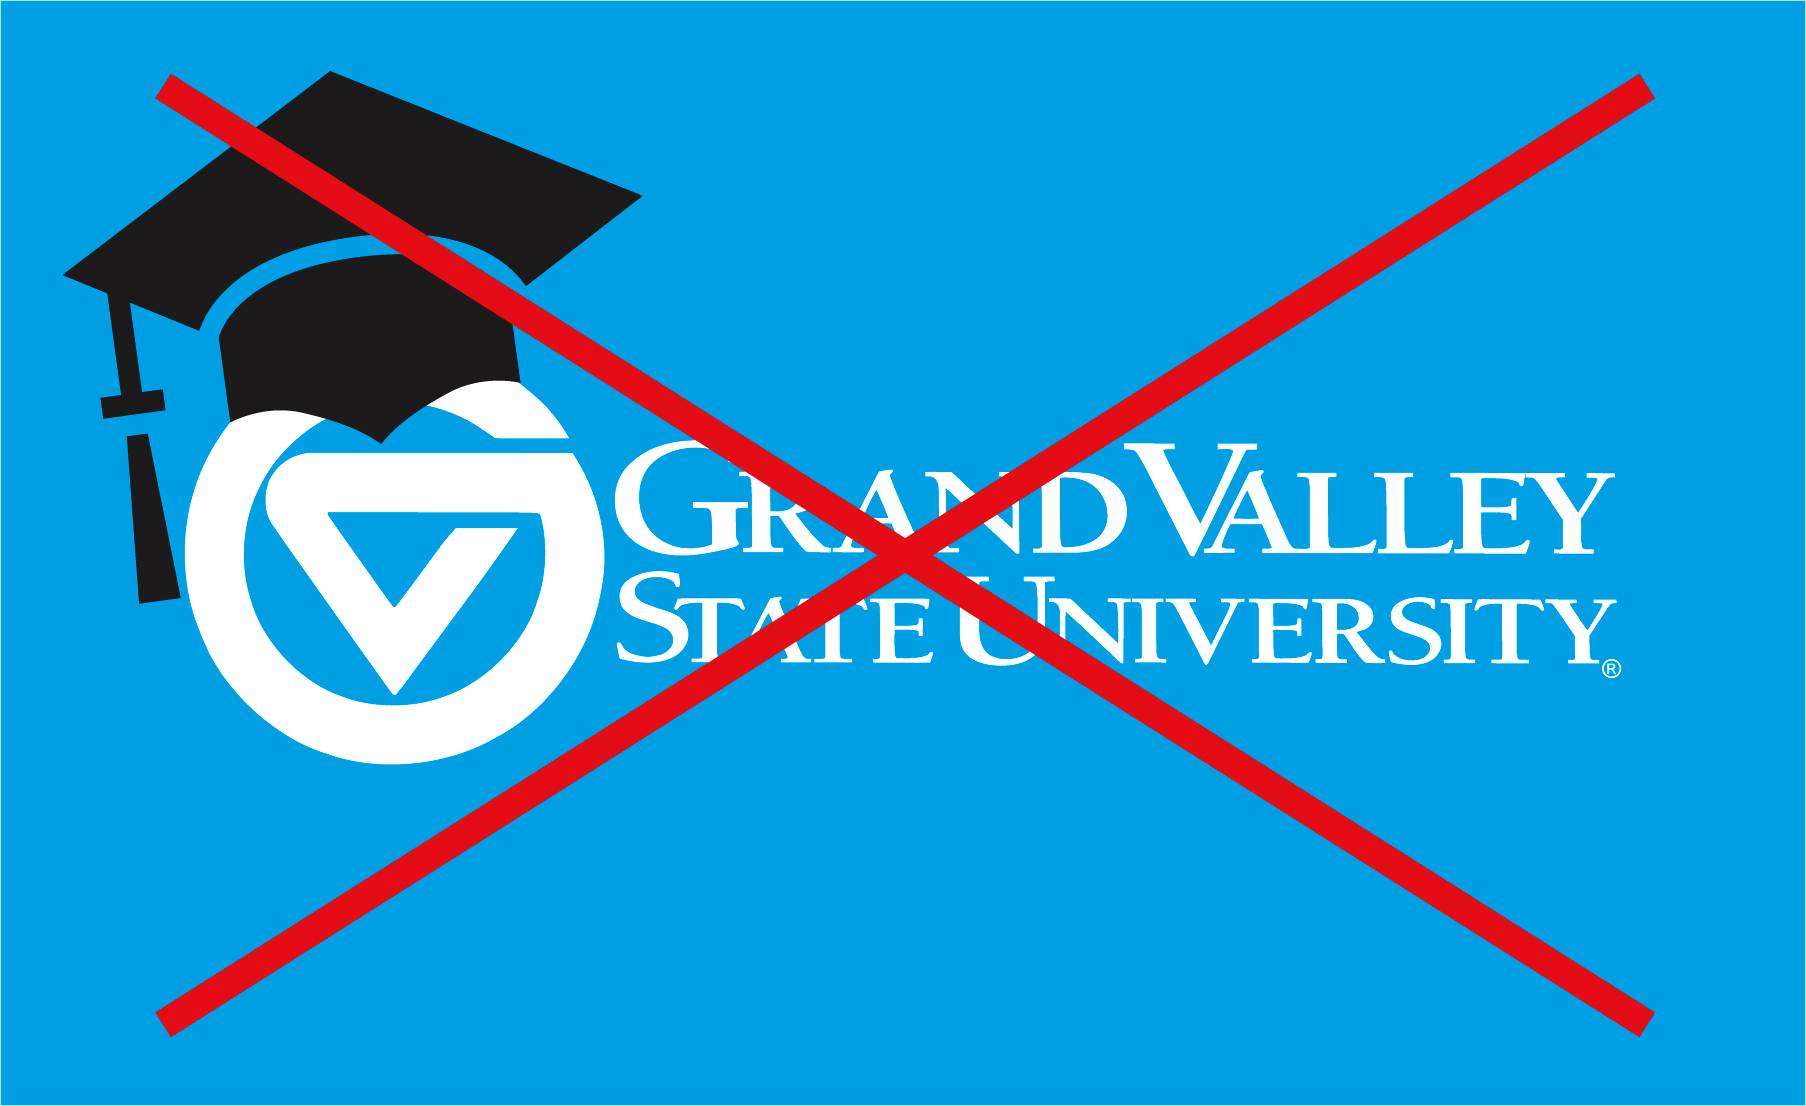 A Grand Valley logo with a graduation cap on top of the circle-g logomark. A red X overlays the image.